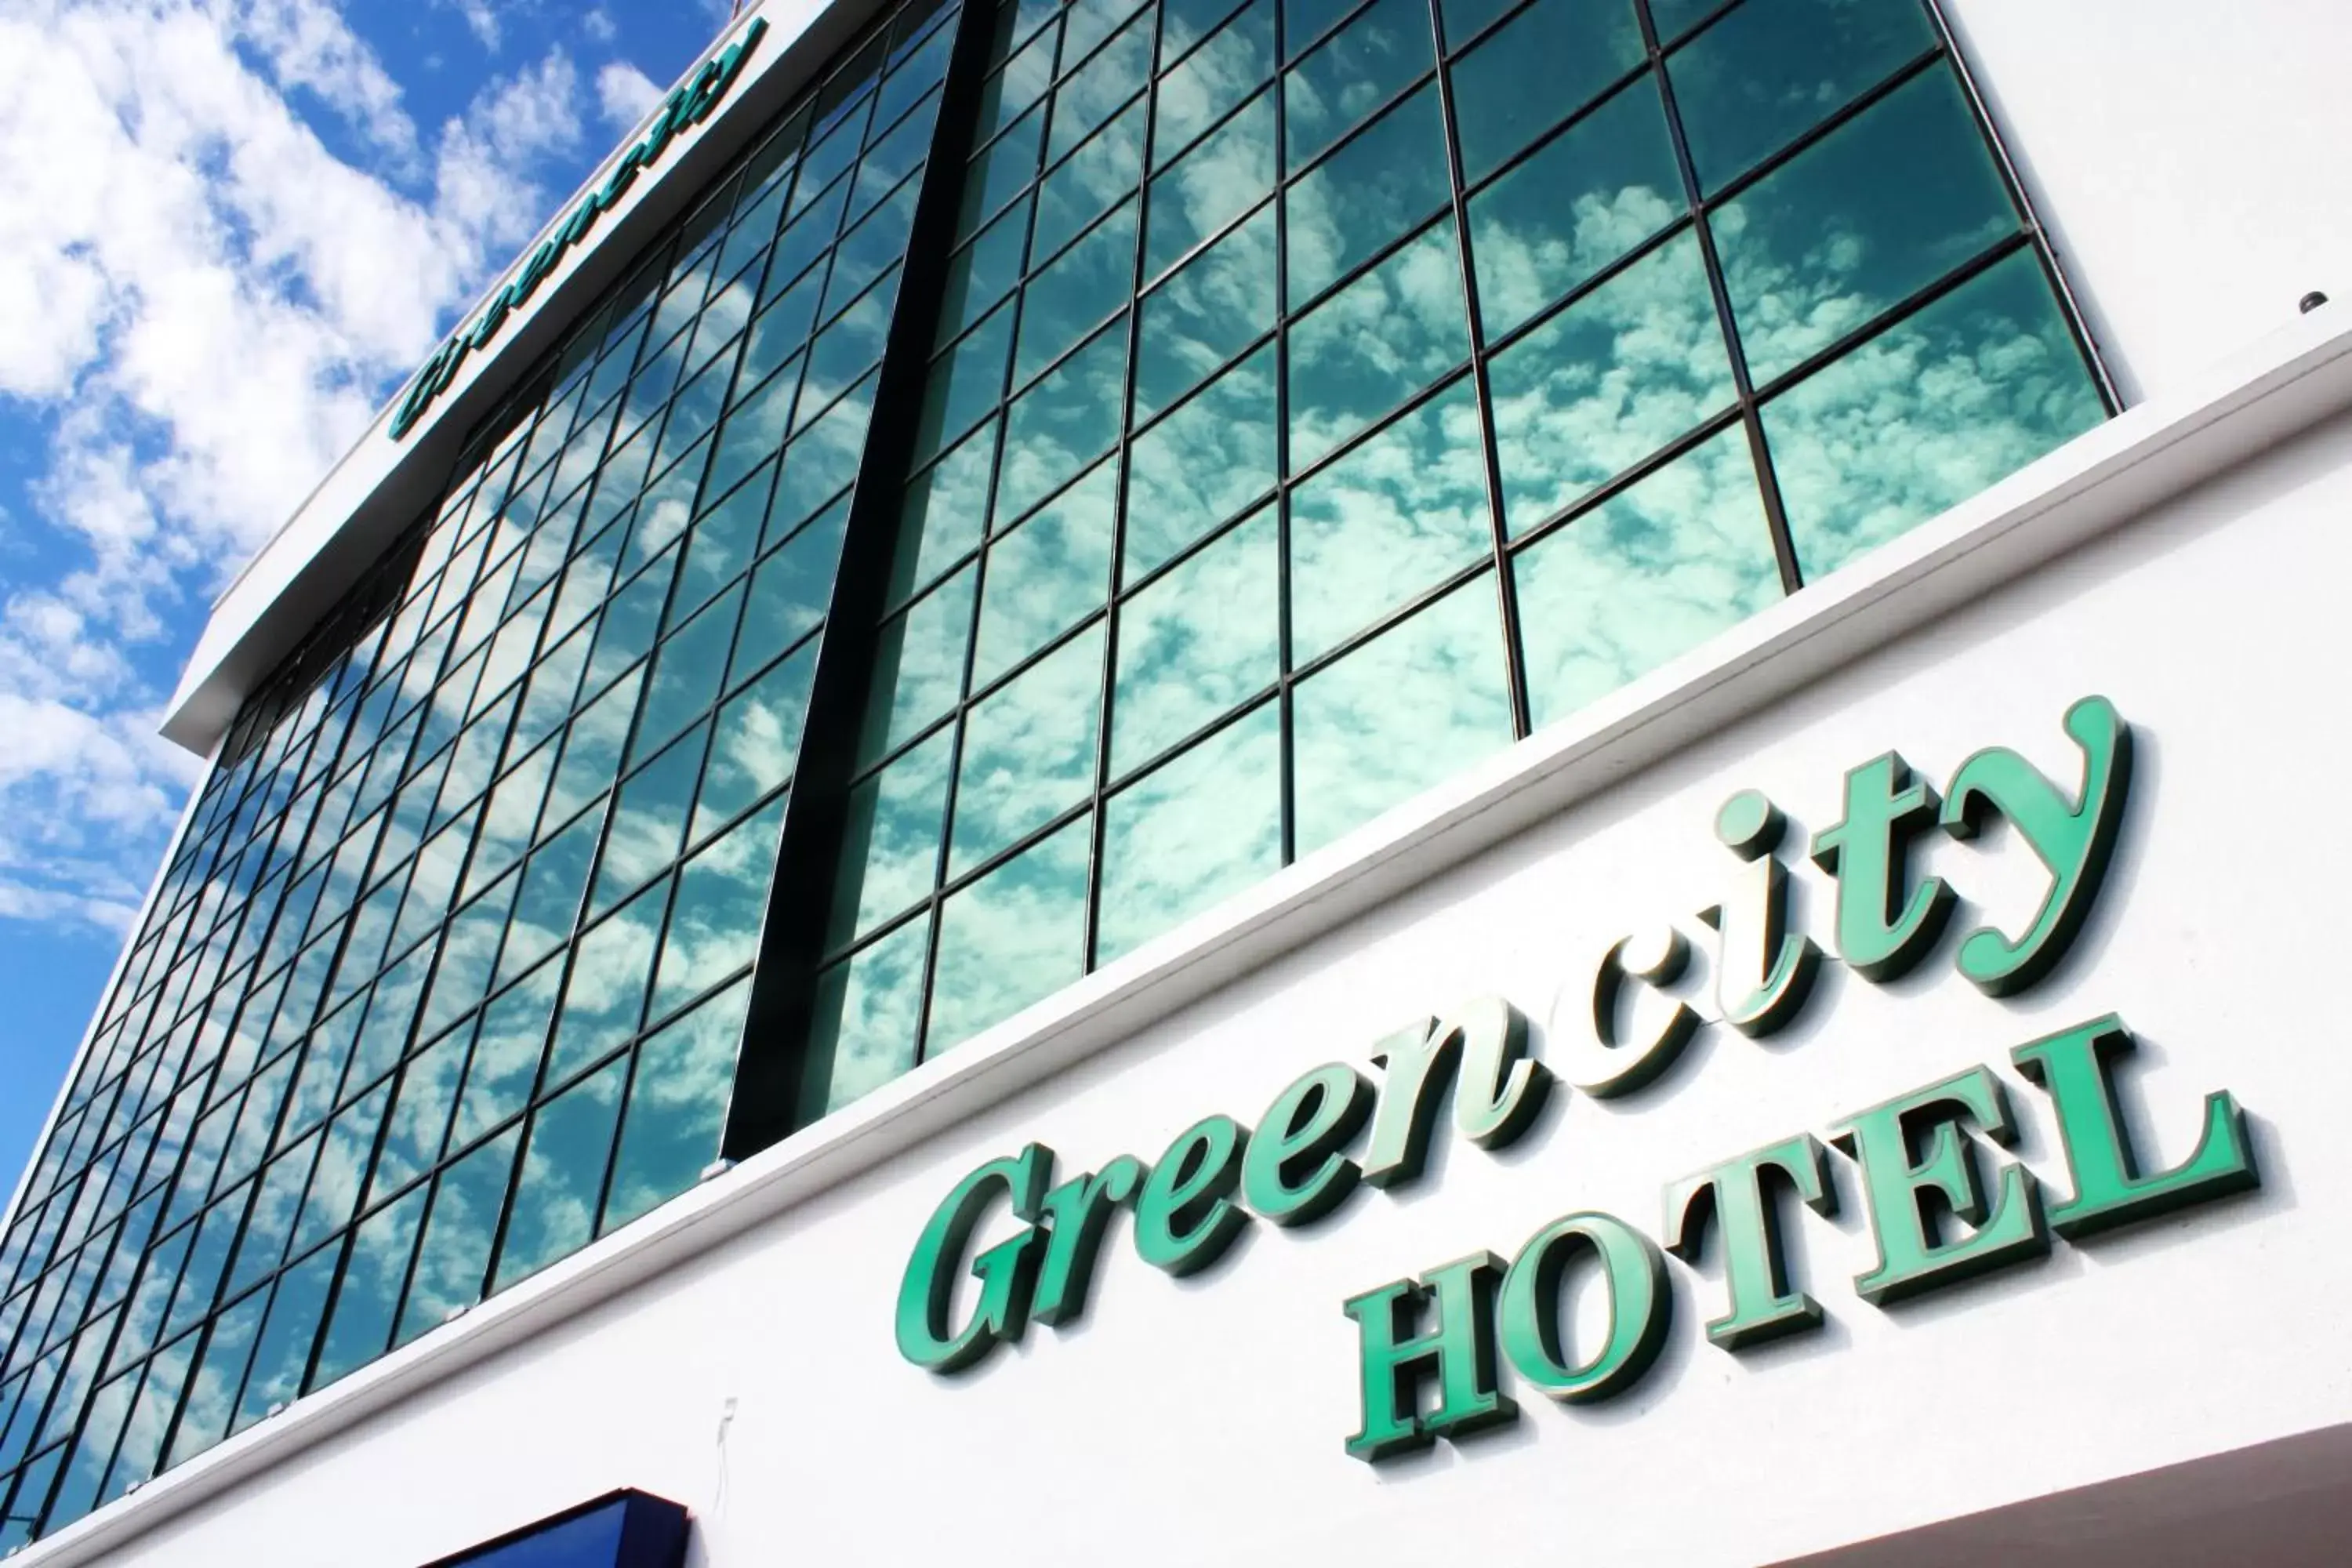 Property building in Greencity Hotel